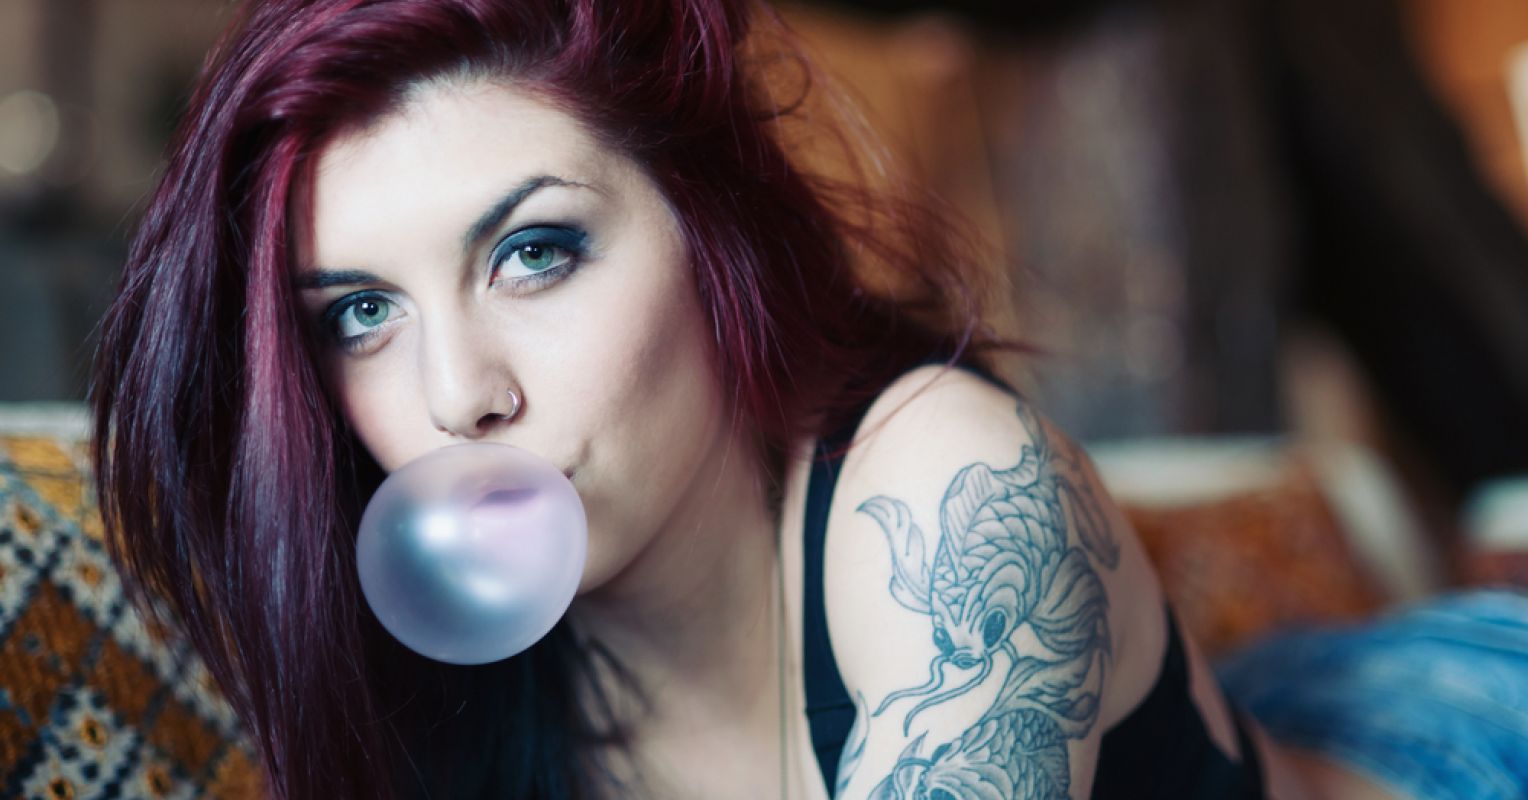 Pierced And Tattooed Girls - Are Tattooed Women Really More Promiscuous? | Psychology Today